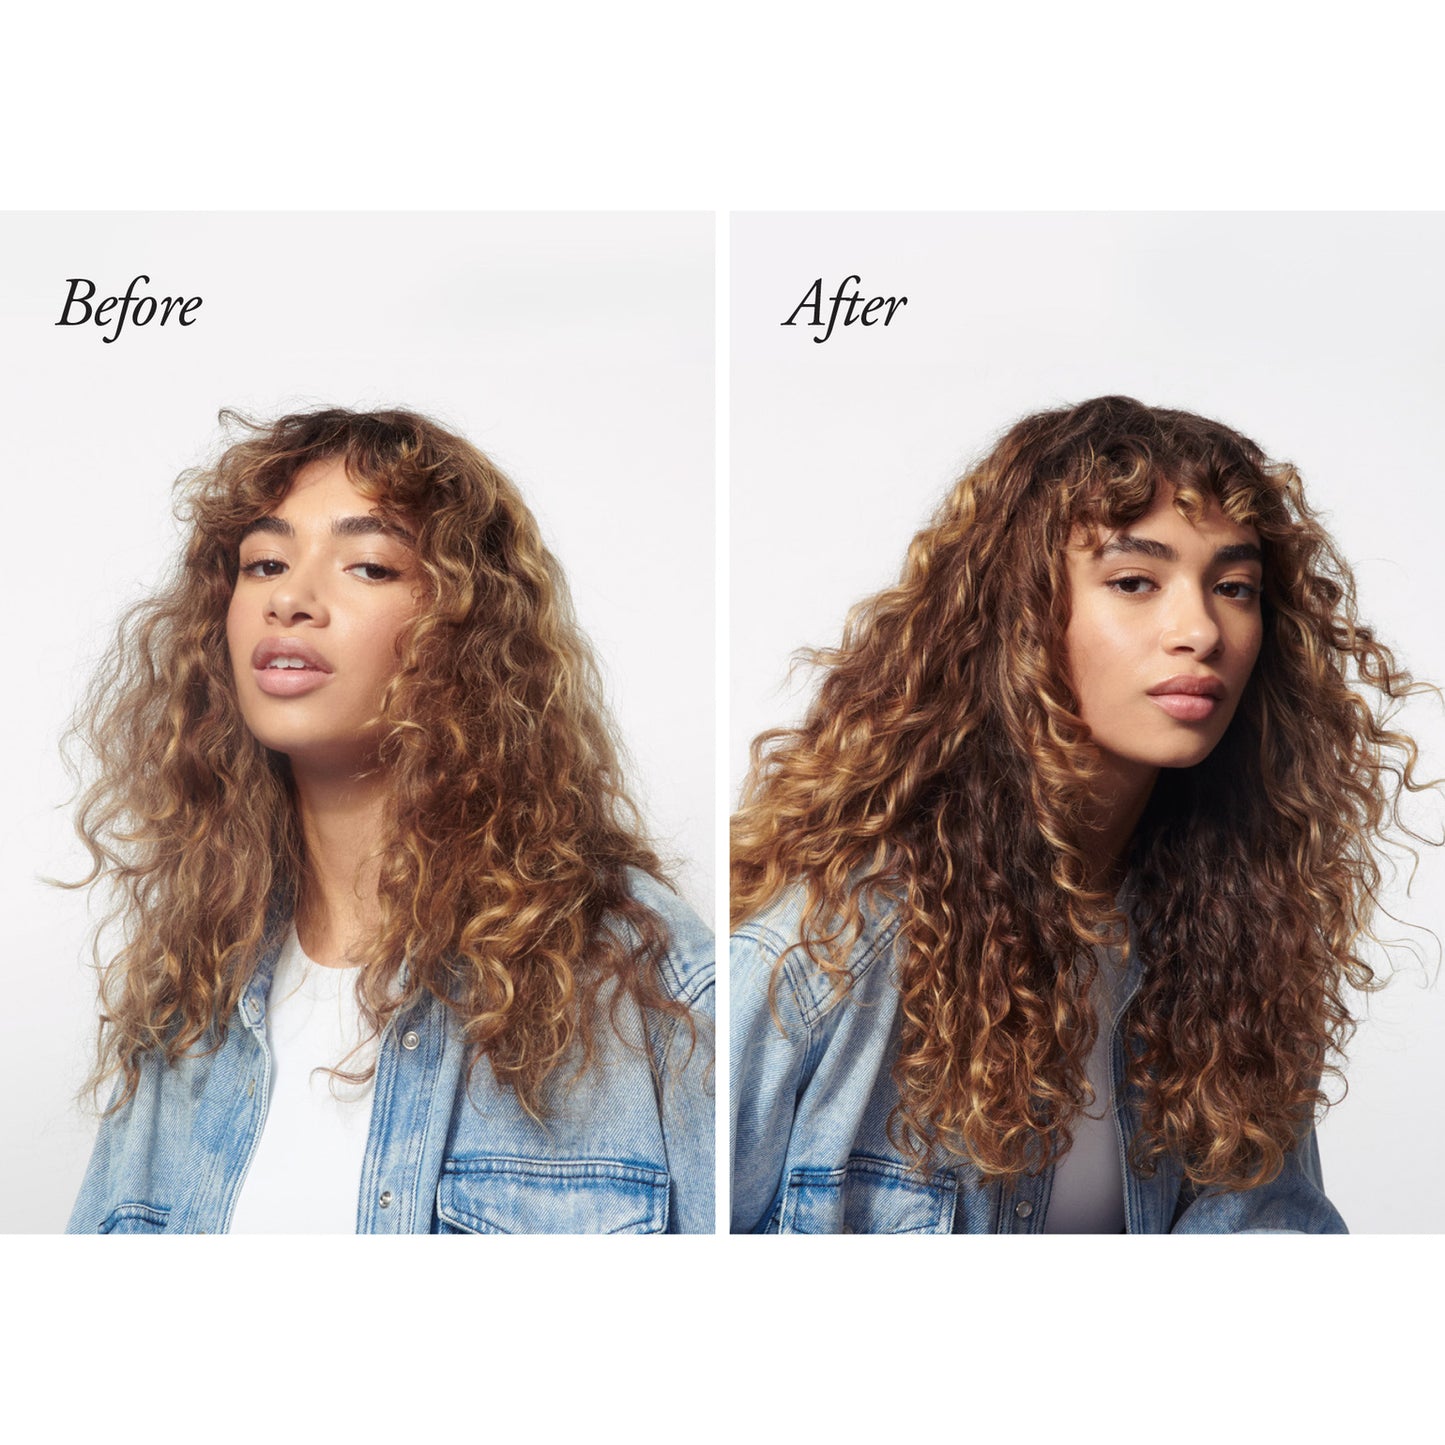 Oribe Curl Gloss Hydration and Hold